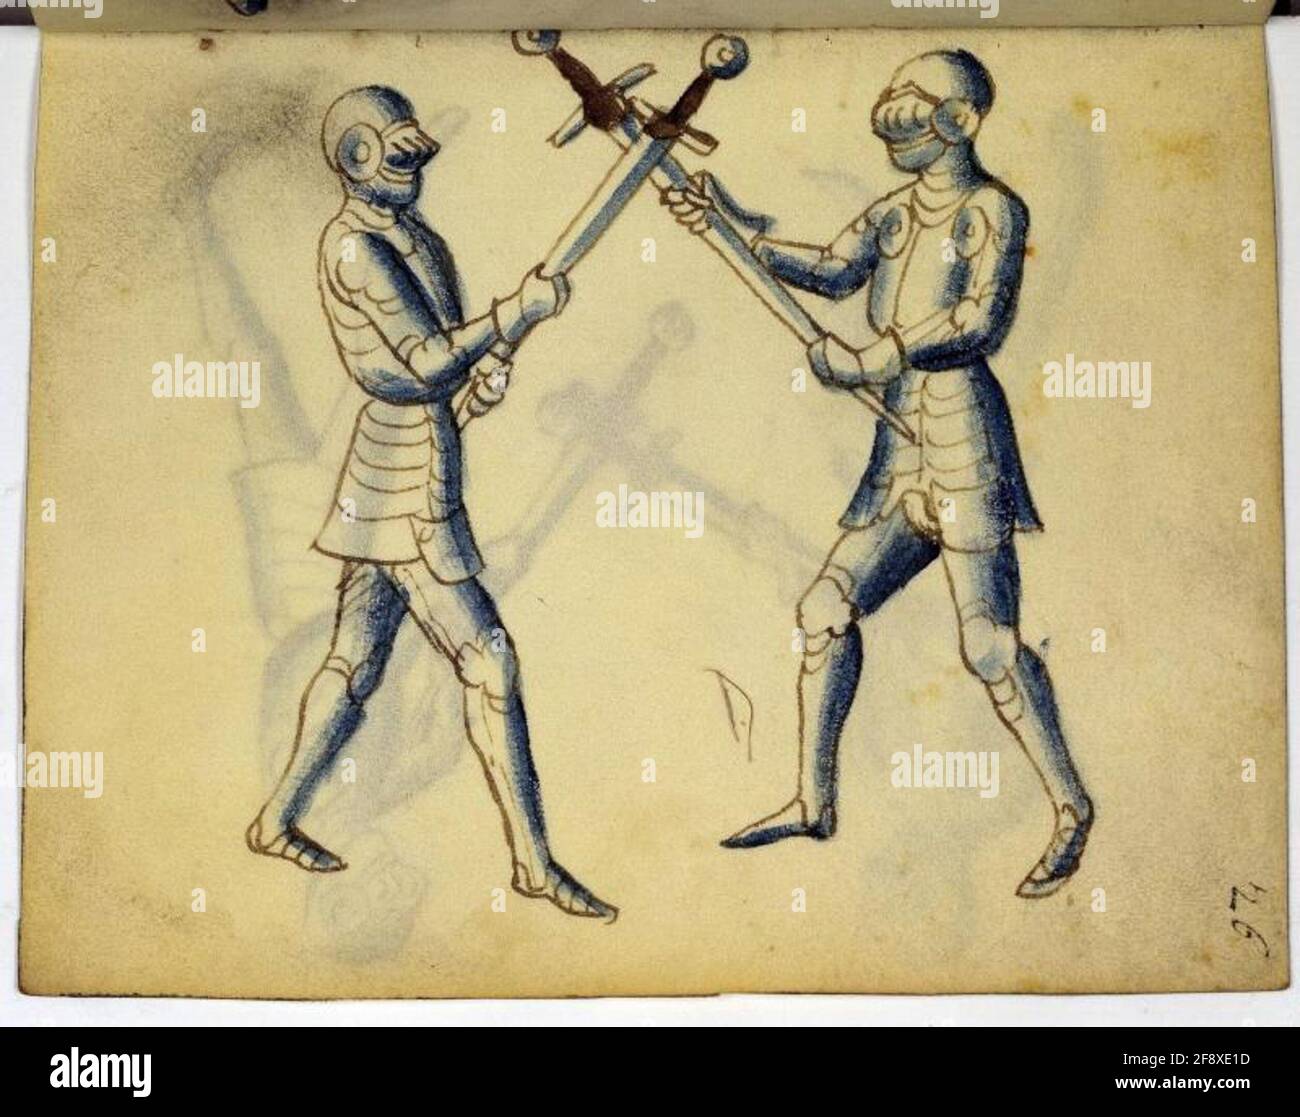 Cod. 11093, fol. 26r: Book on Swordsmanship and Wrestling Full page: fencing scene; pen and brush drawing, Southwestern Germany, mid-15th c. Stock Photo